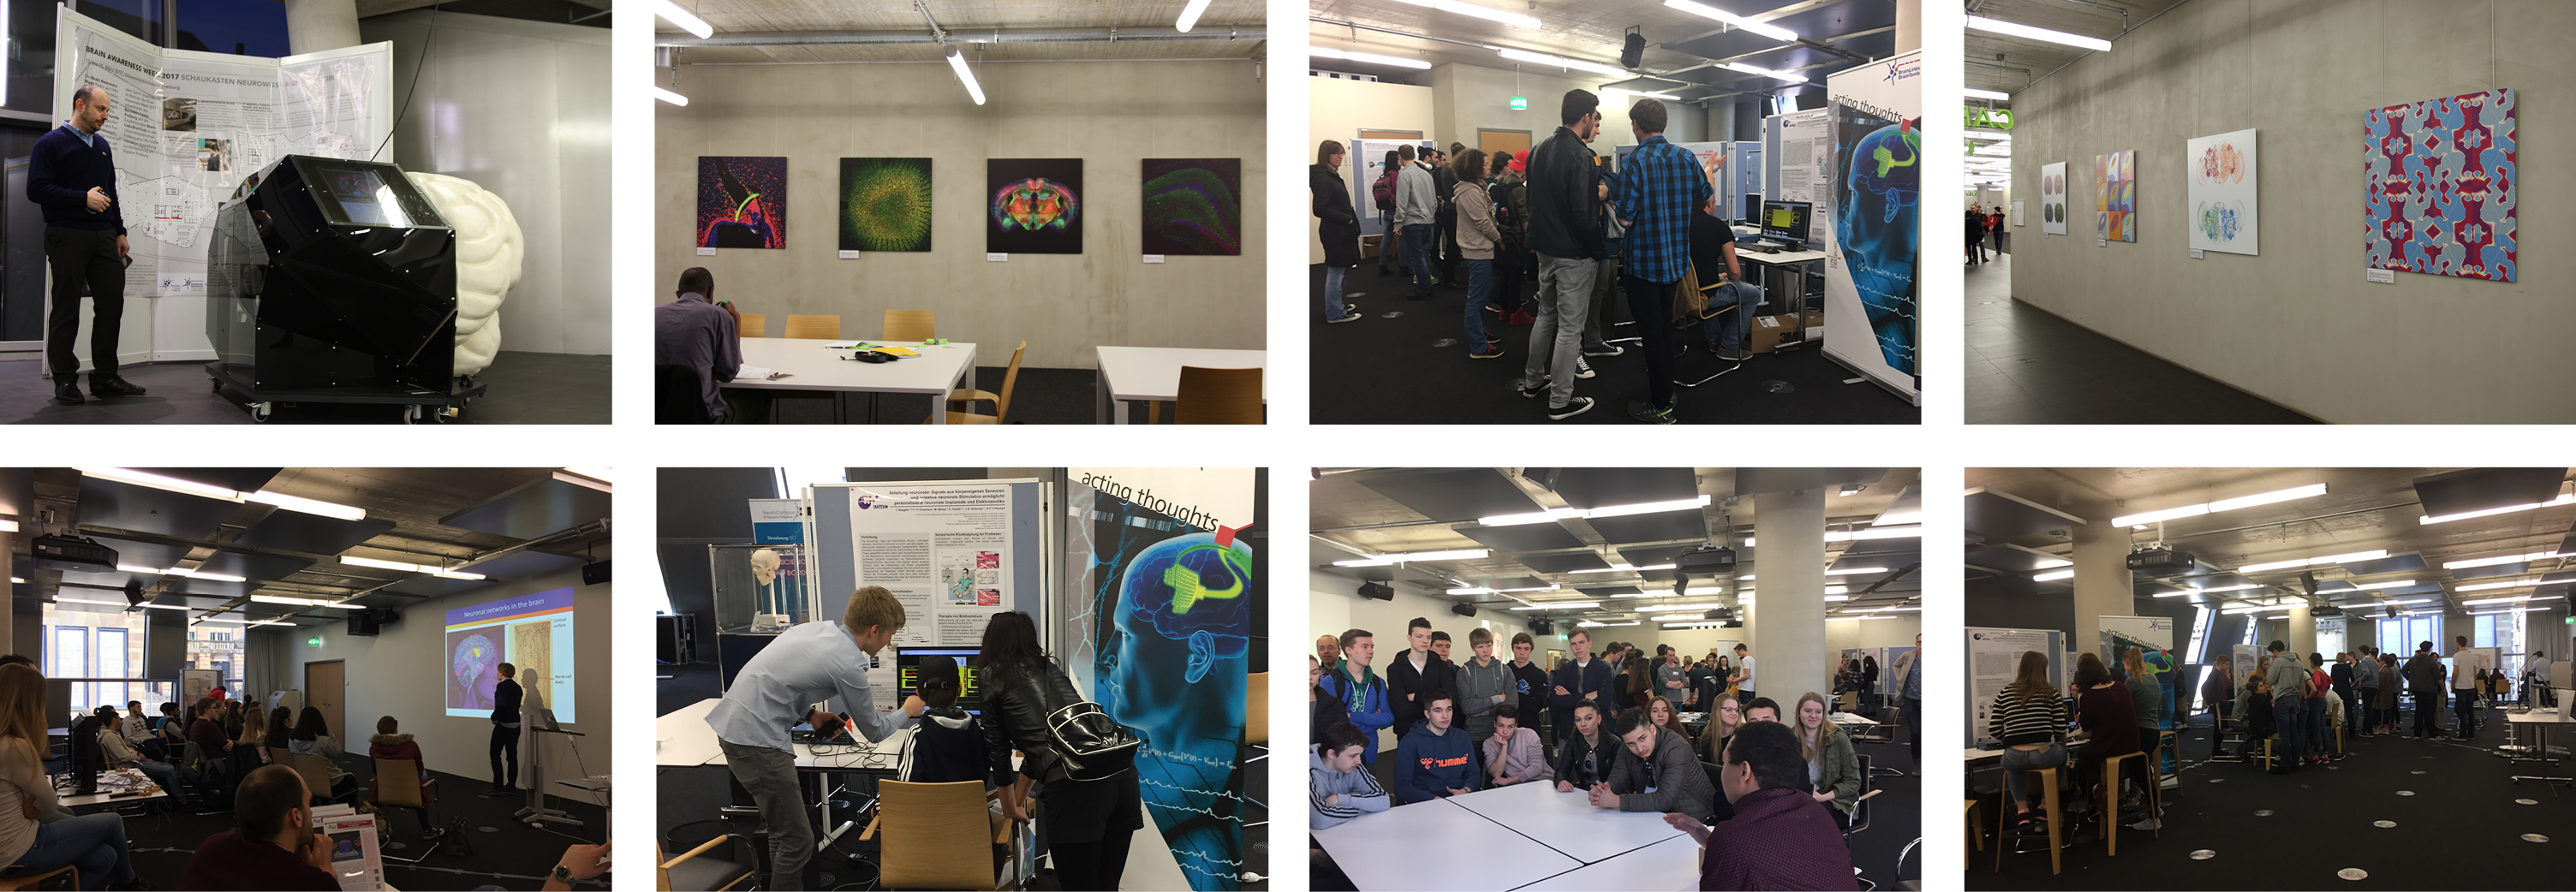 Looking back at Brain Awareness Week 2017: „Showcase for Neuroscience in Freiburg“ at Freiburg’s University Library experiences great public interest